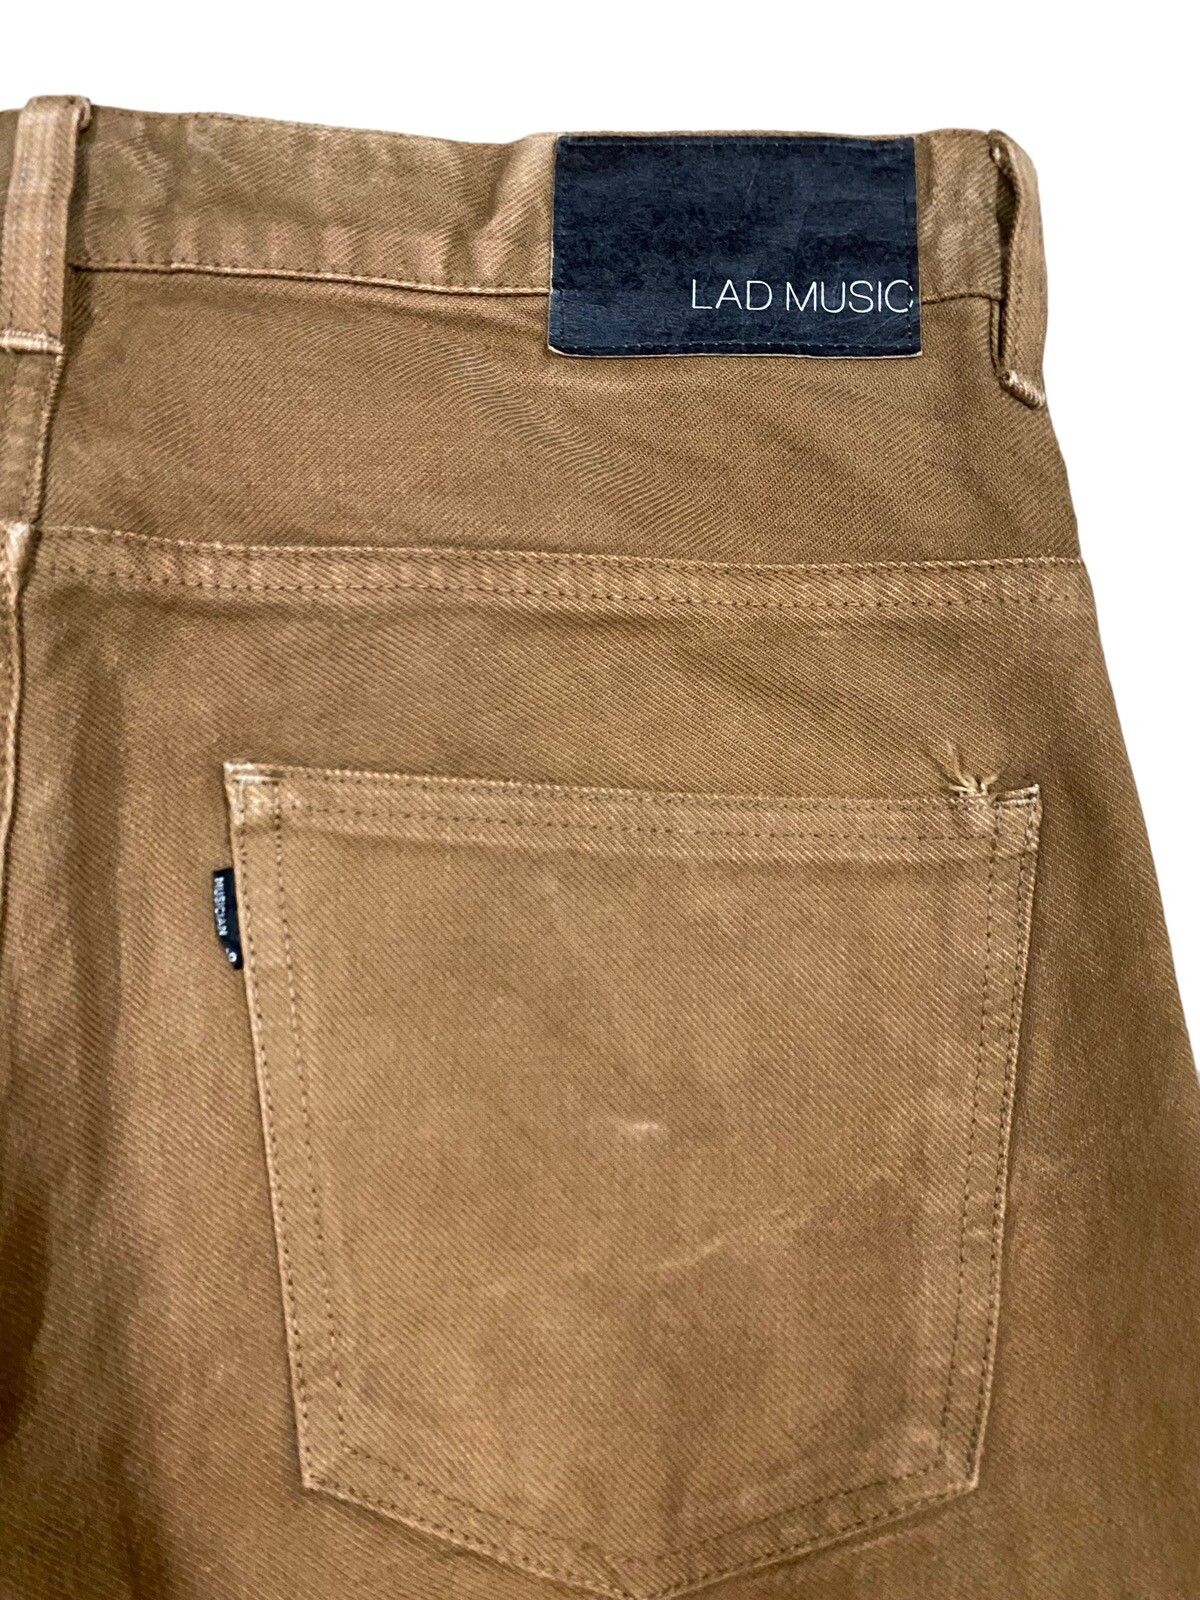 Lad Musician Brown Straight Cup Jeans Made In Japan - 13